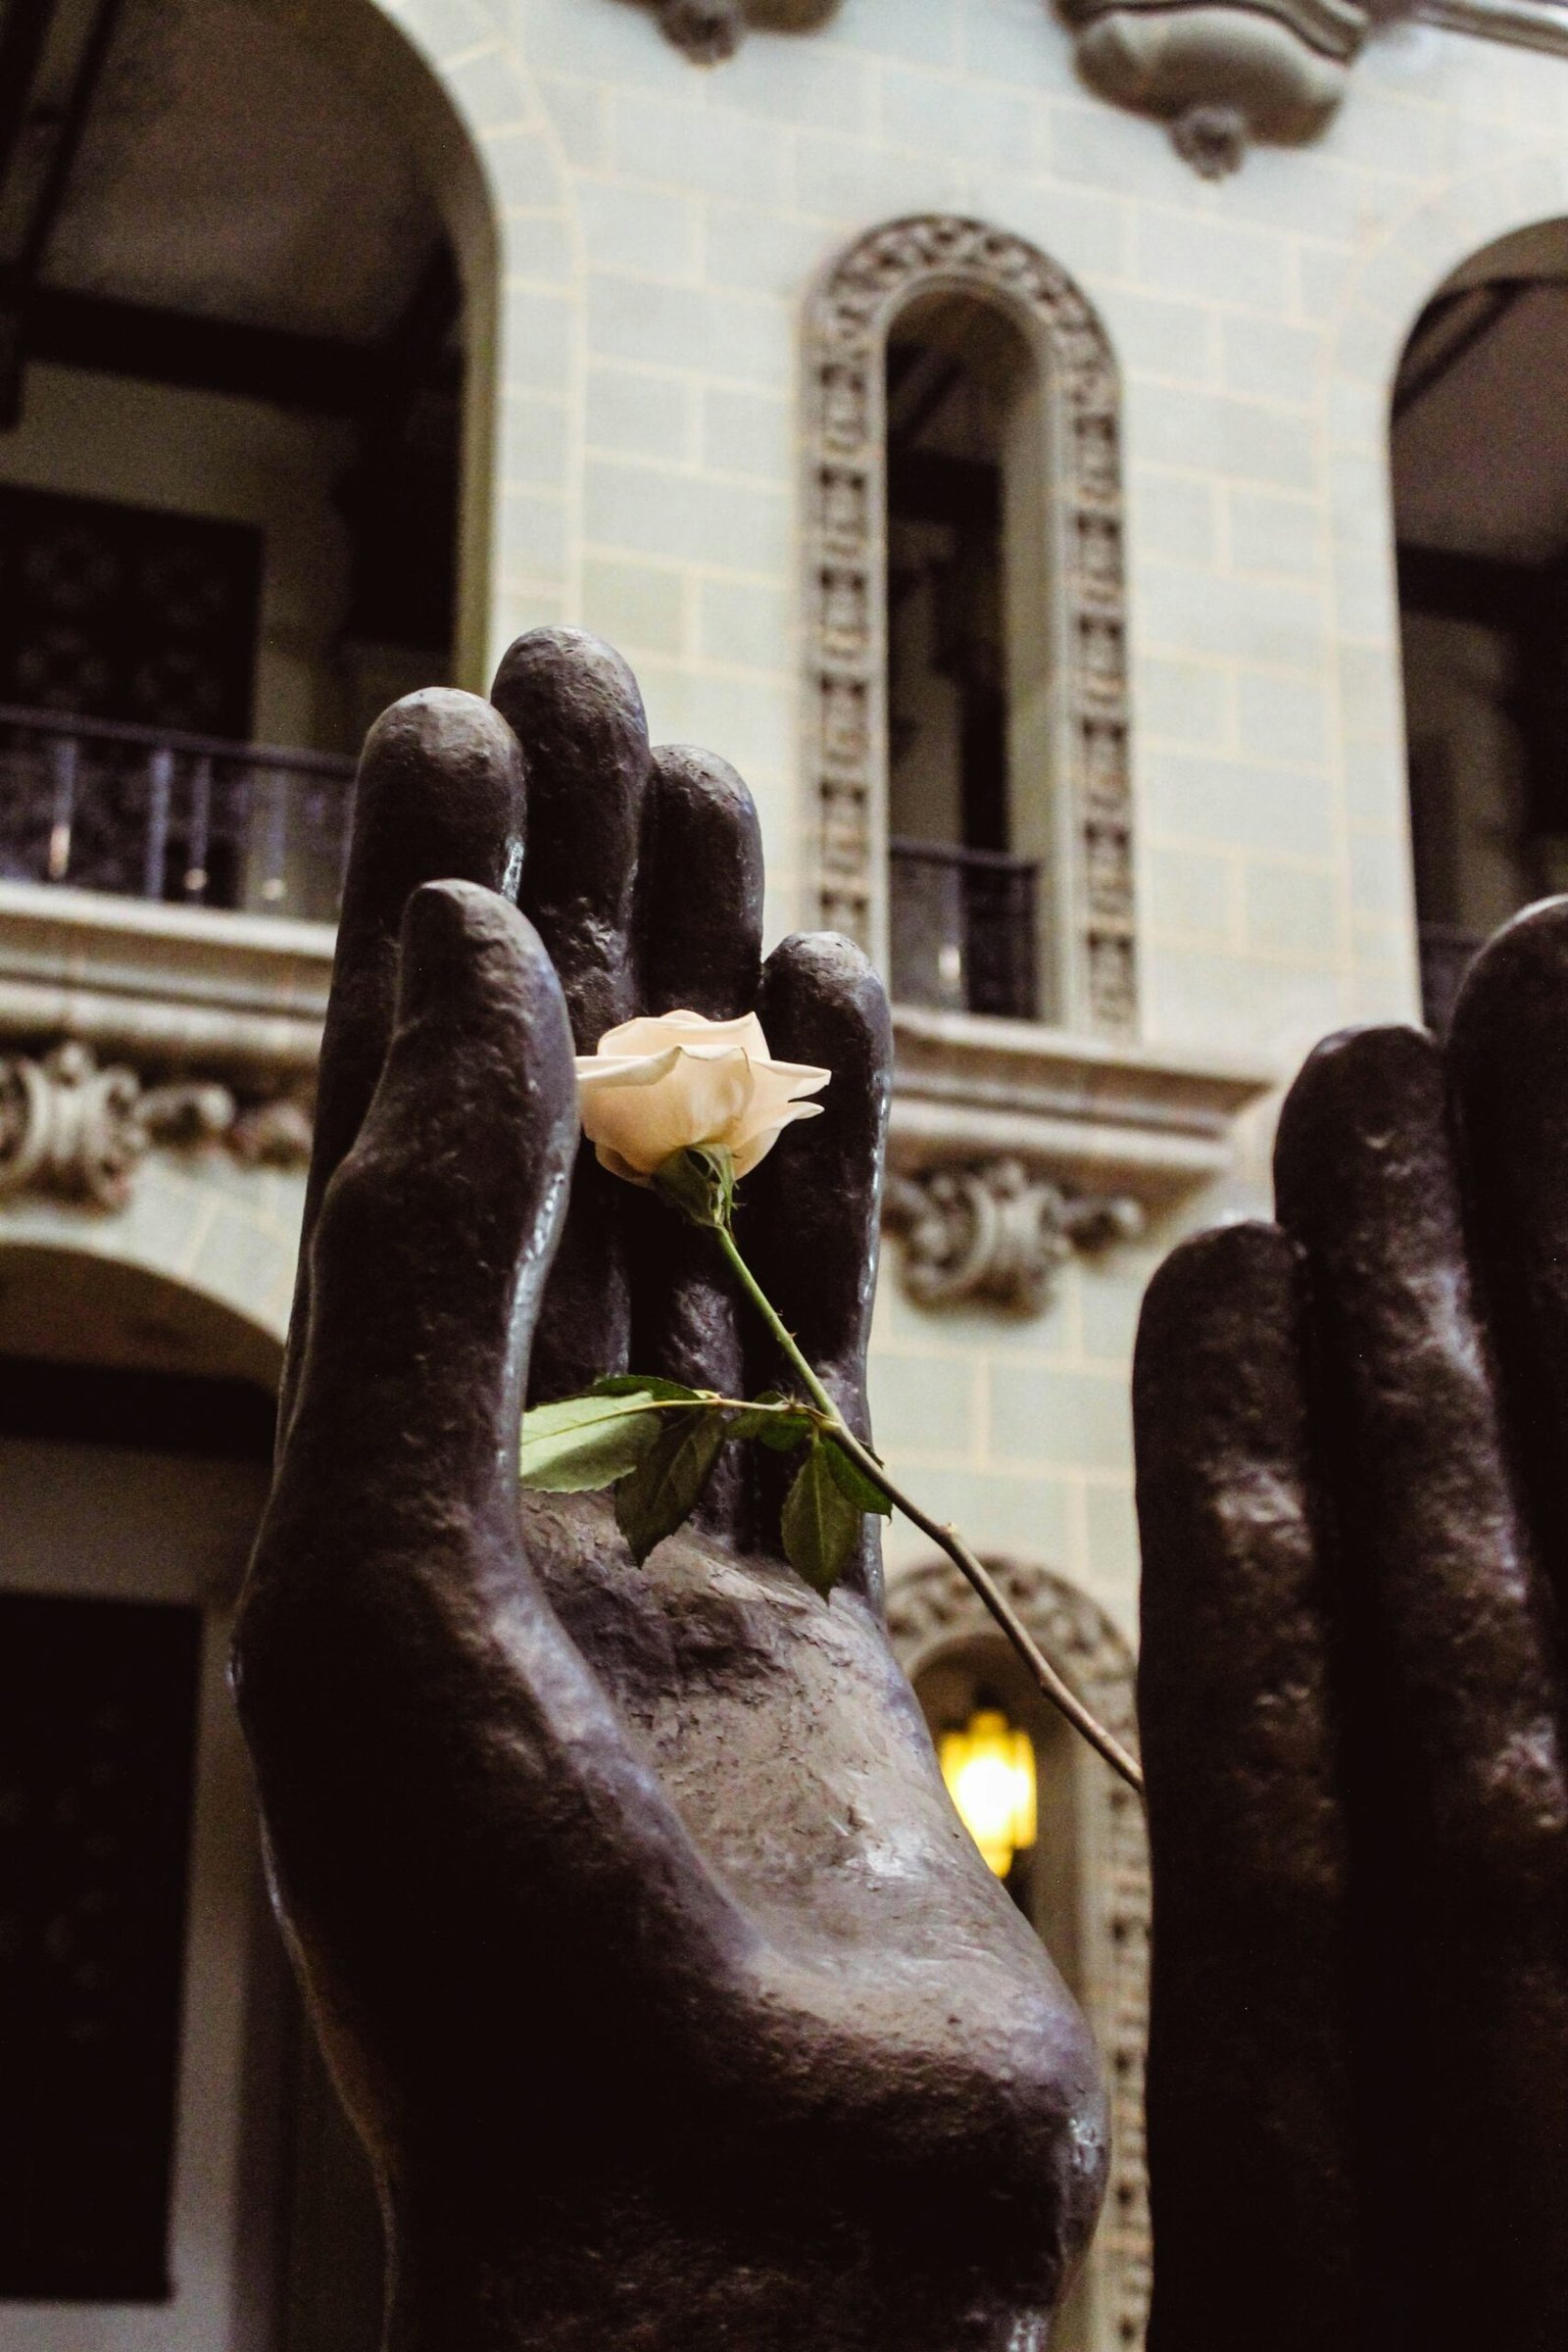 a statue of a hand holding a rose